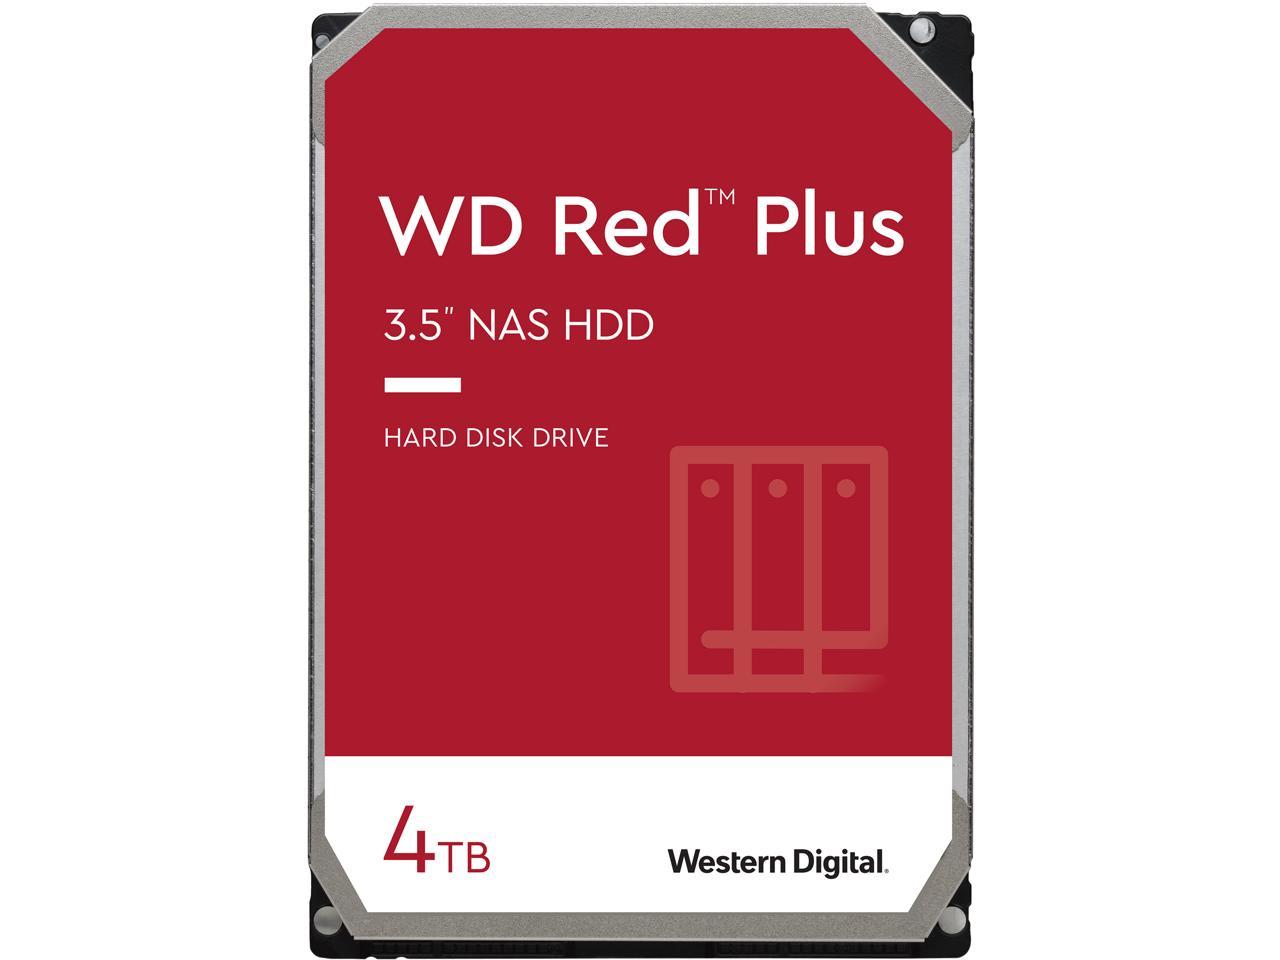 4TB WD Red Plus NAS Hard Disk Drive $70